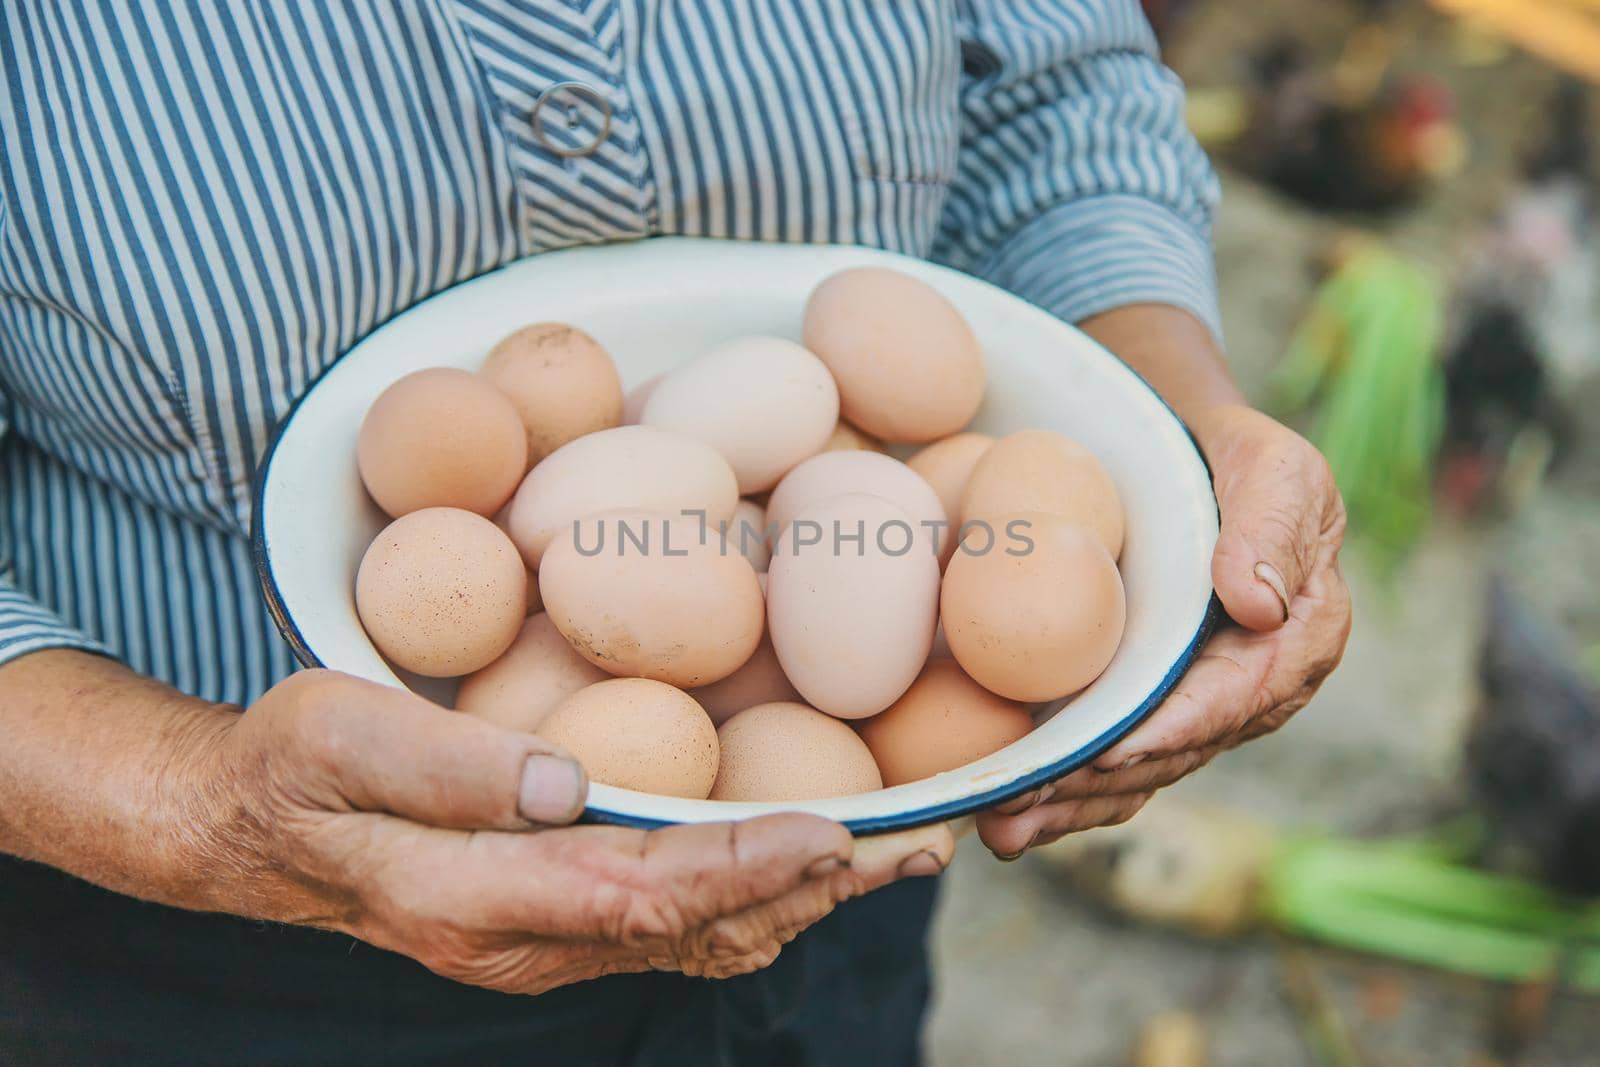 homemade eggs in grandmother's hands. Selective focus. nature.